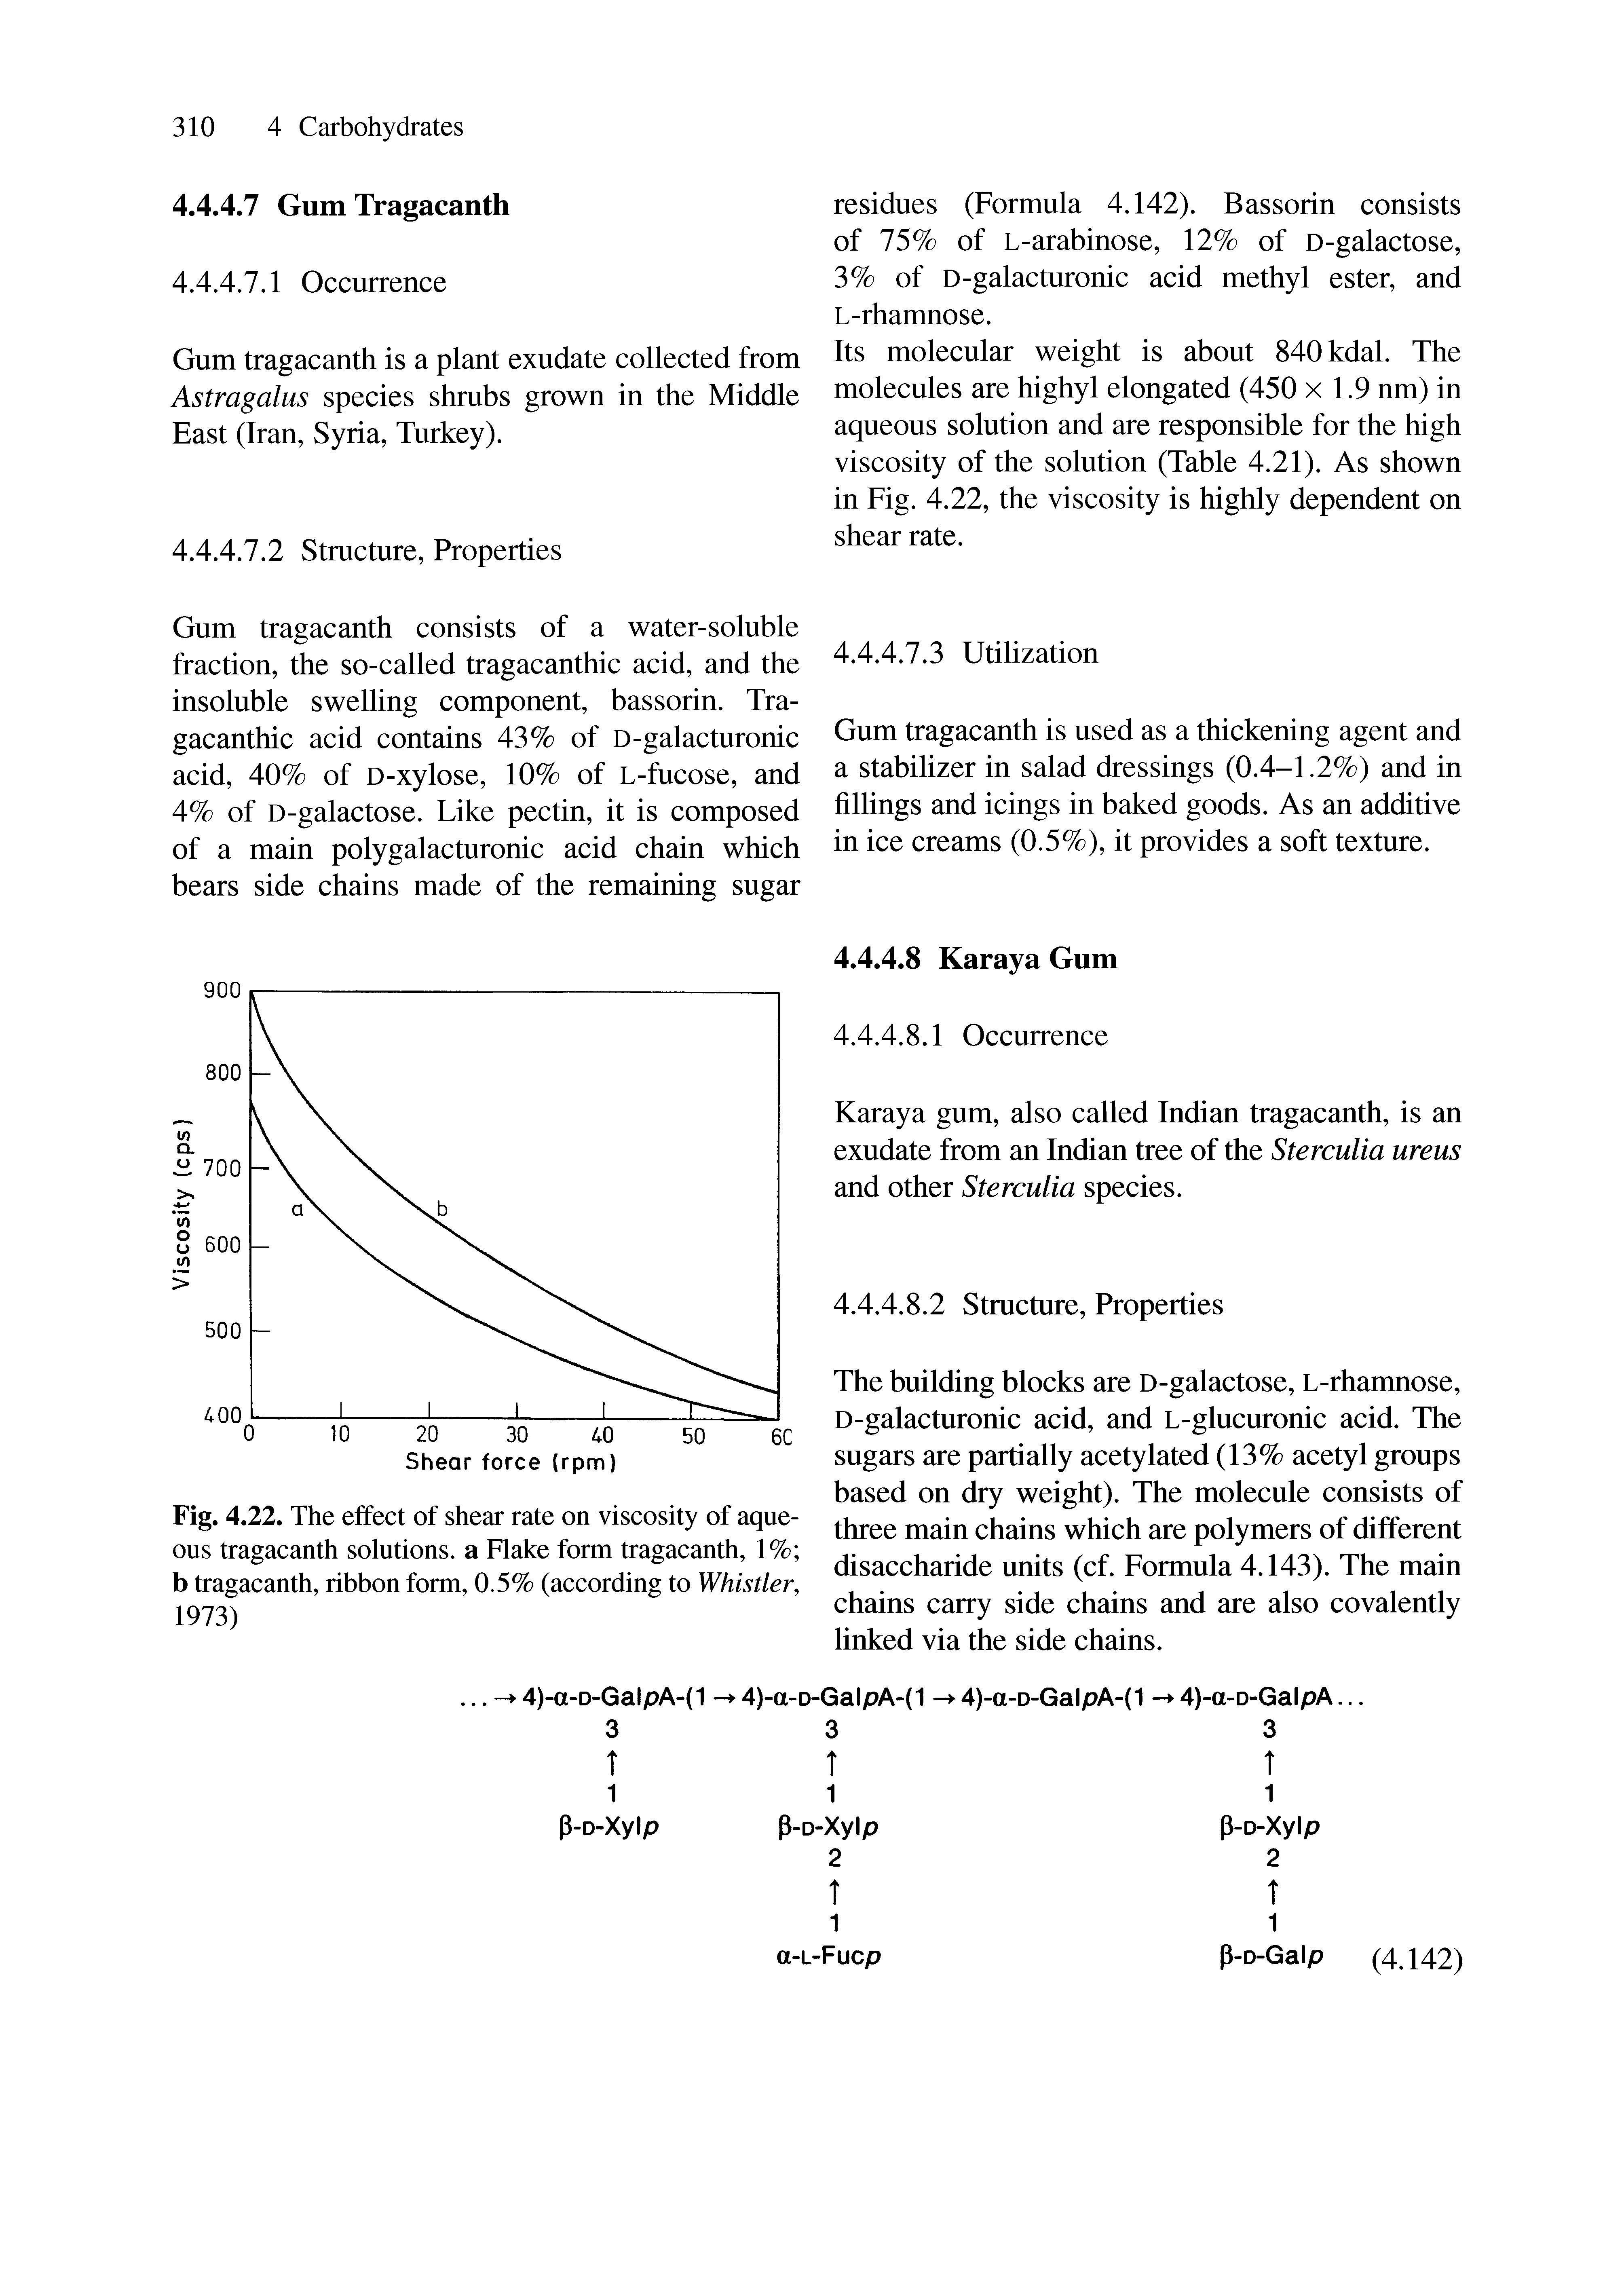 Fig. 4.22. The effect of shear rate on viscosity of aqueous tragacanth solutions, a Flake form tragacanth, 1% b tragacanth, ribbon form, 0.5% (according to Whistler, 1973)...